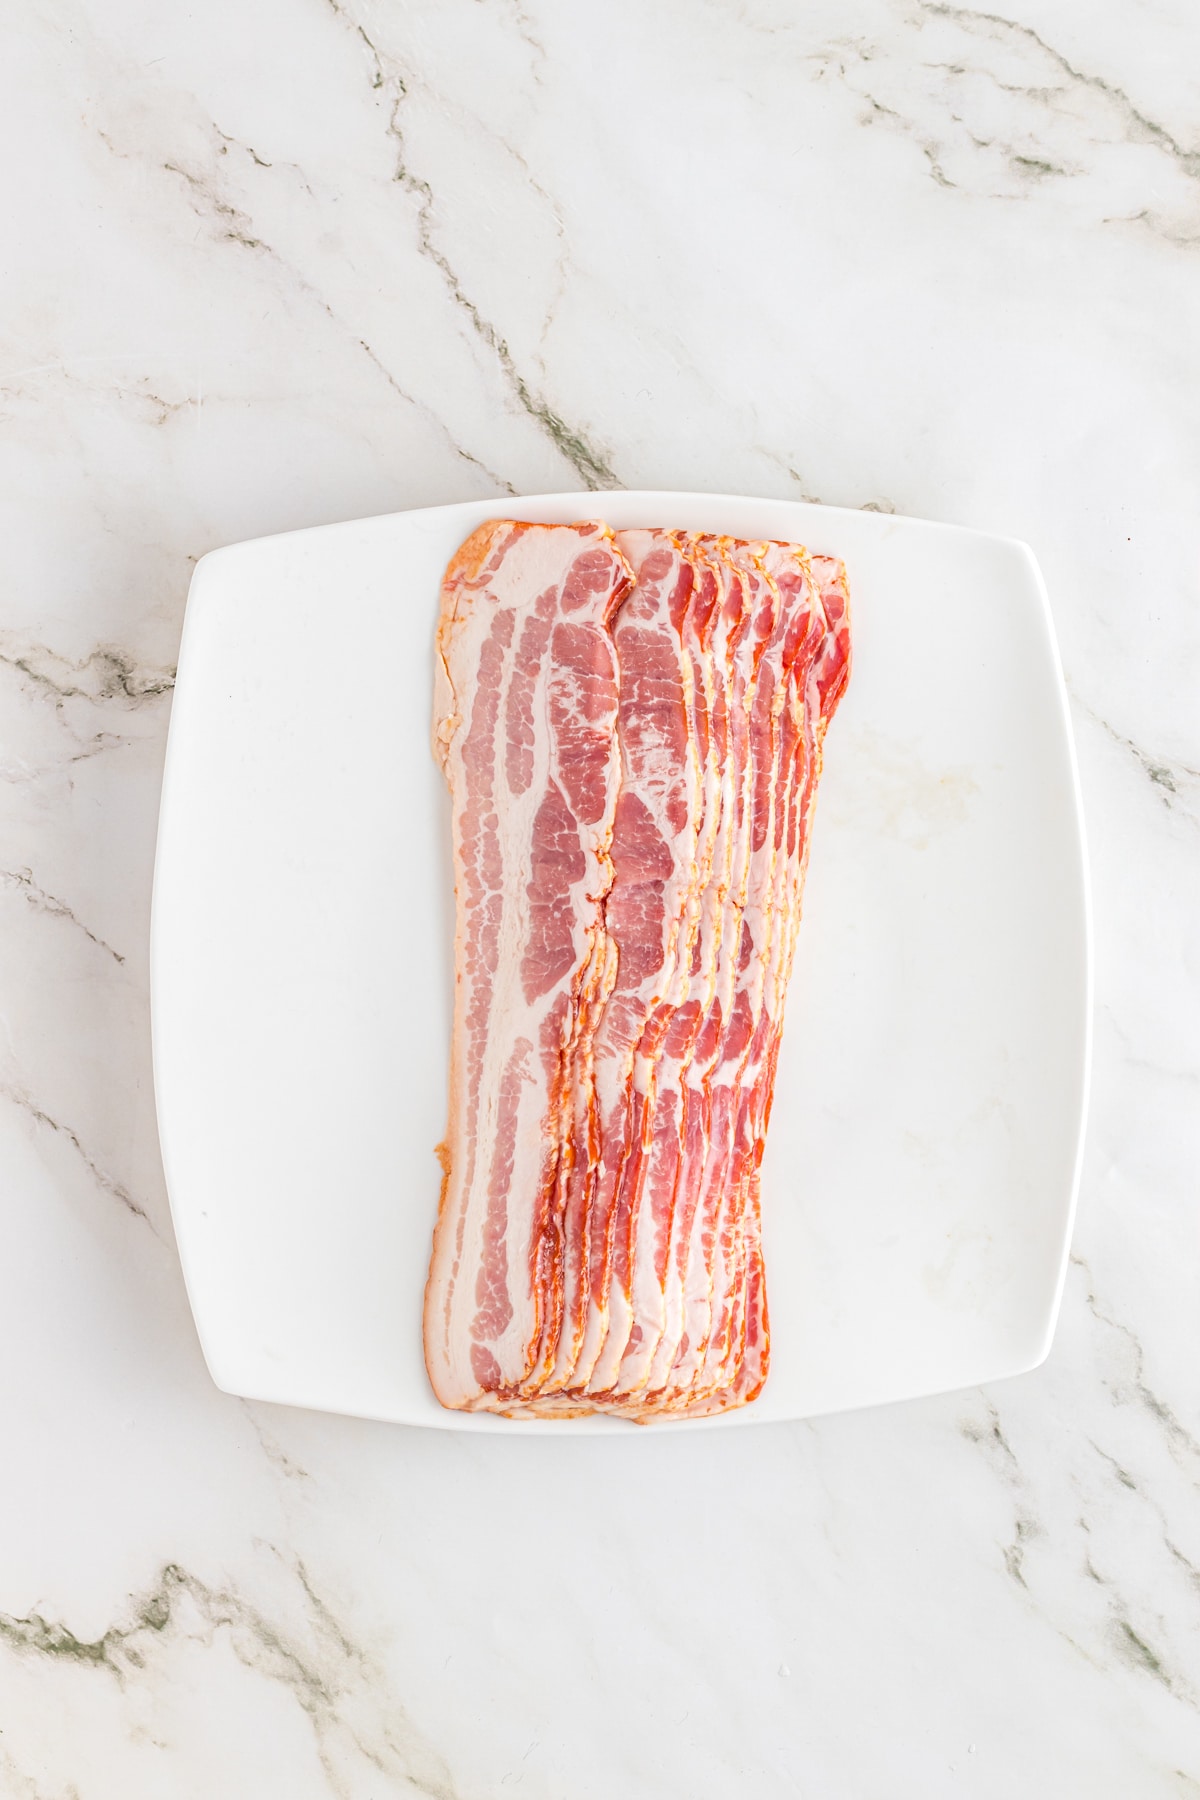 Raw bacon on a white plate.